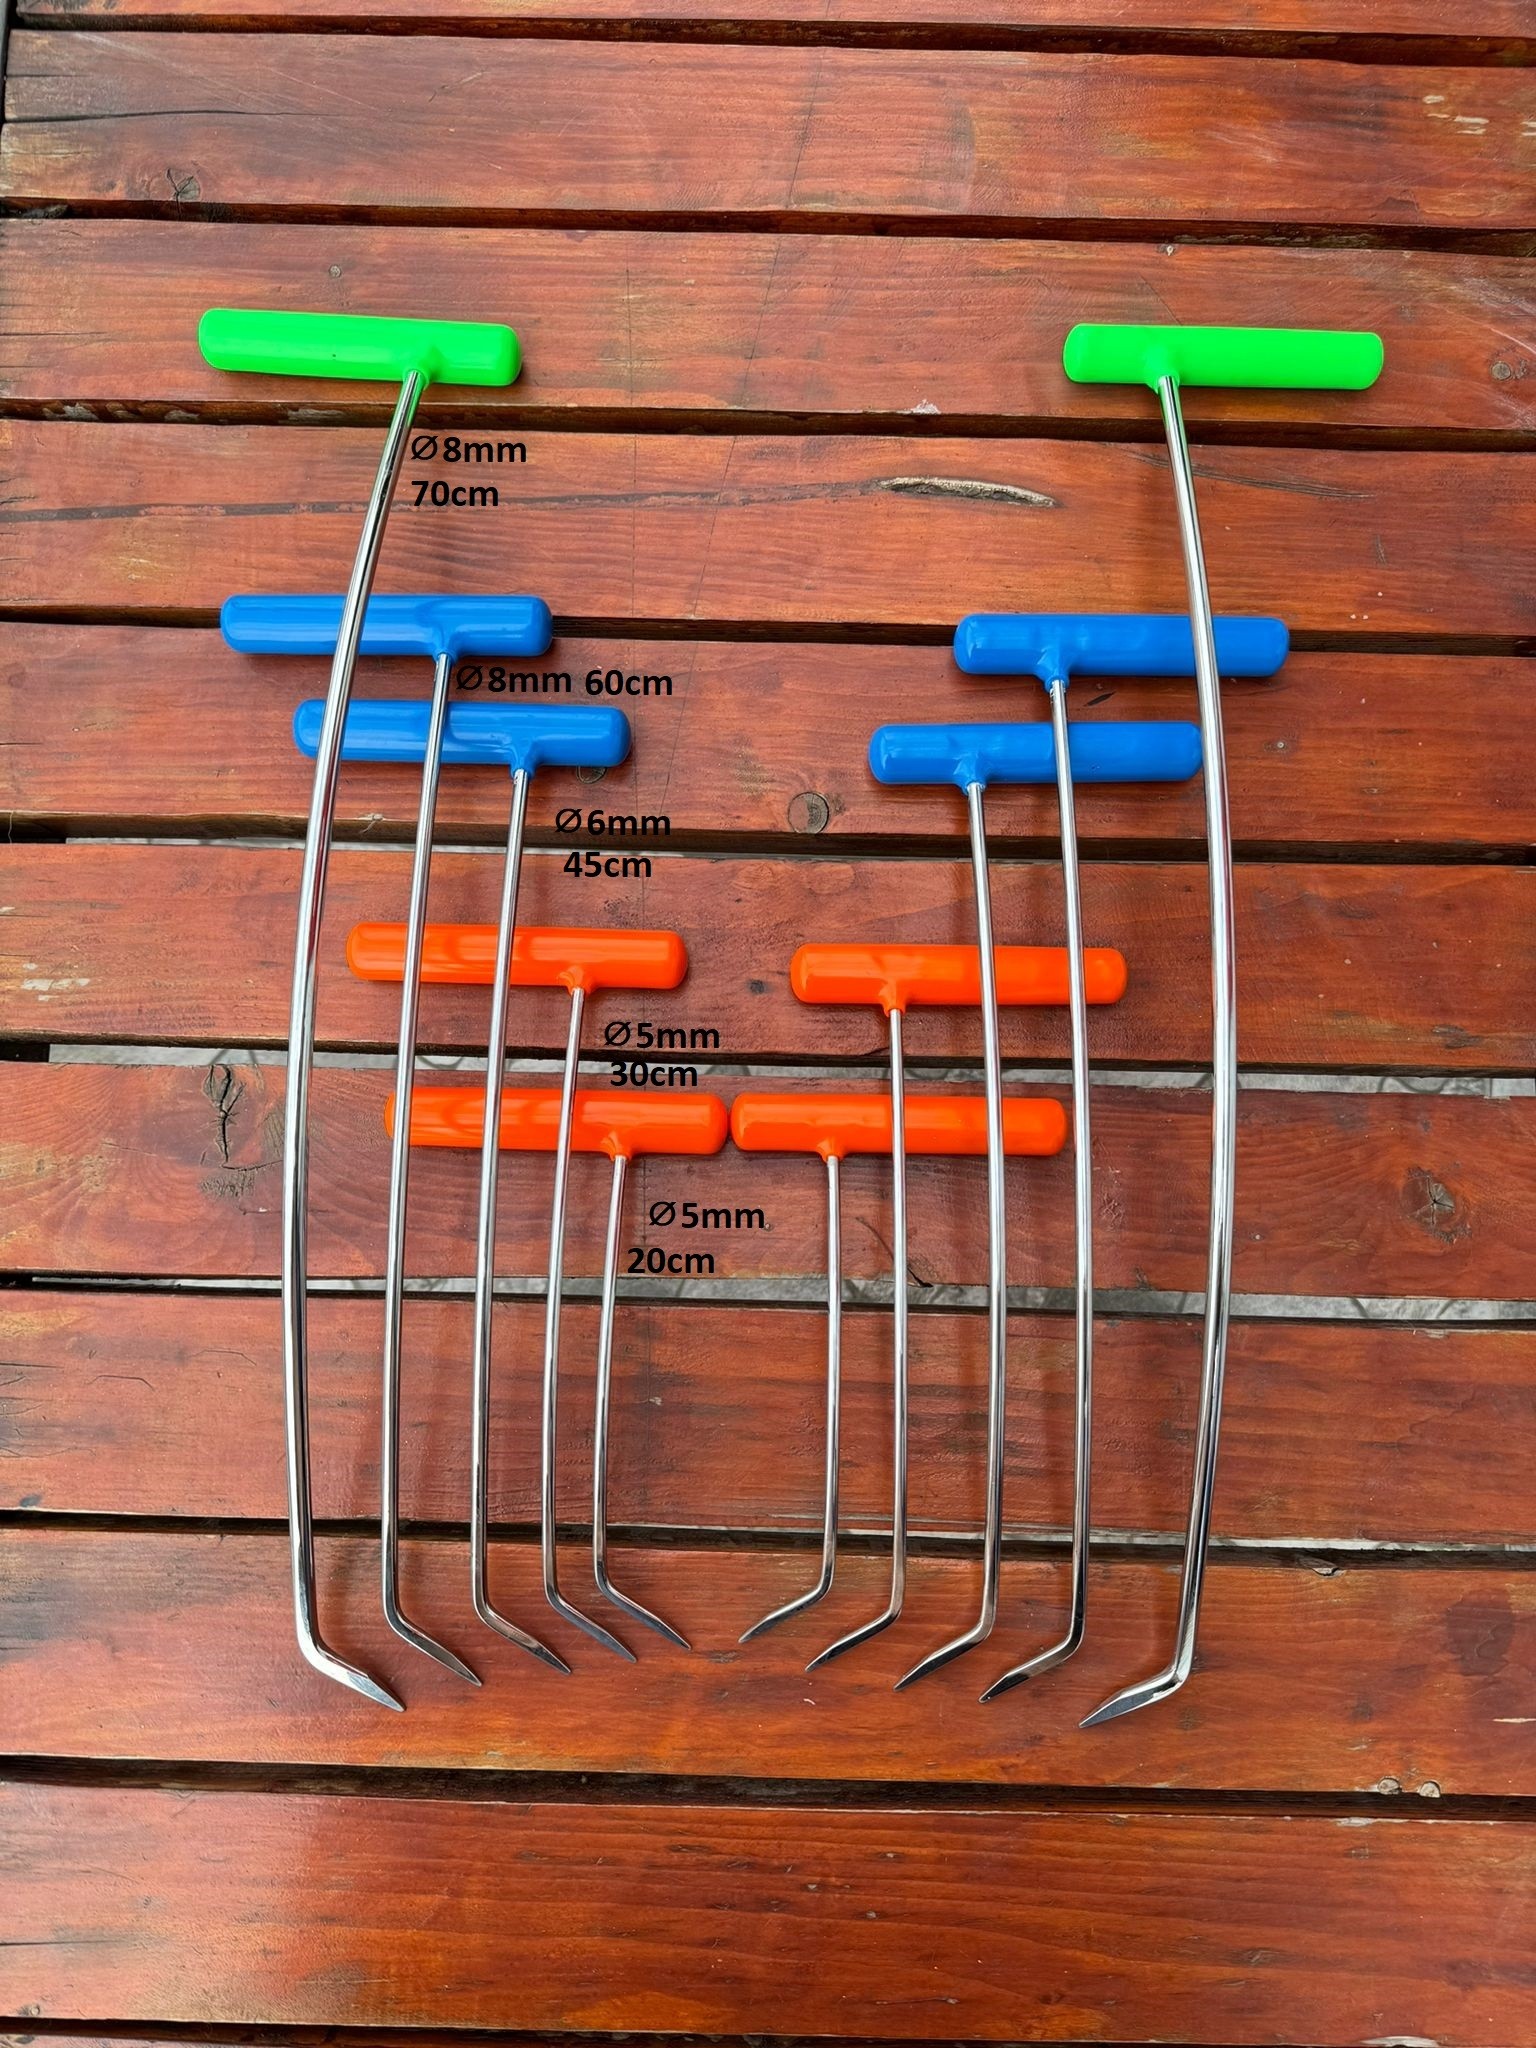 PDR BLANKED ROD SET 6 PIECES Paintless Dent Repair Rod 6 Pieces Coating PDR Body Paintless Dent Repair Pdrtr135